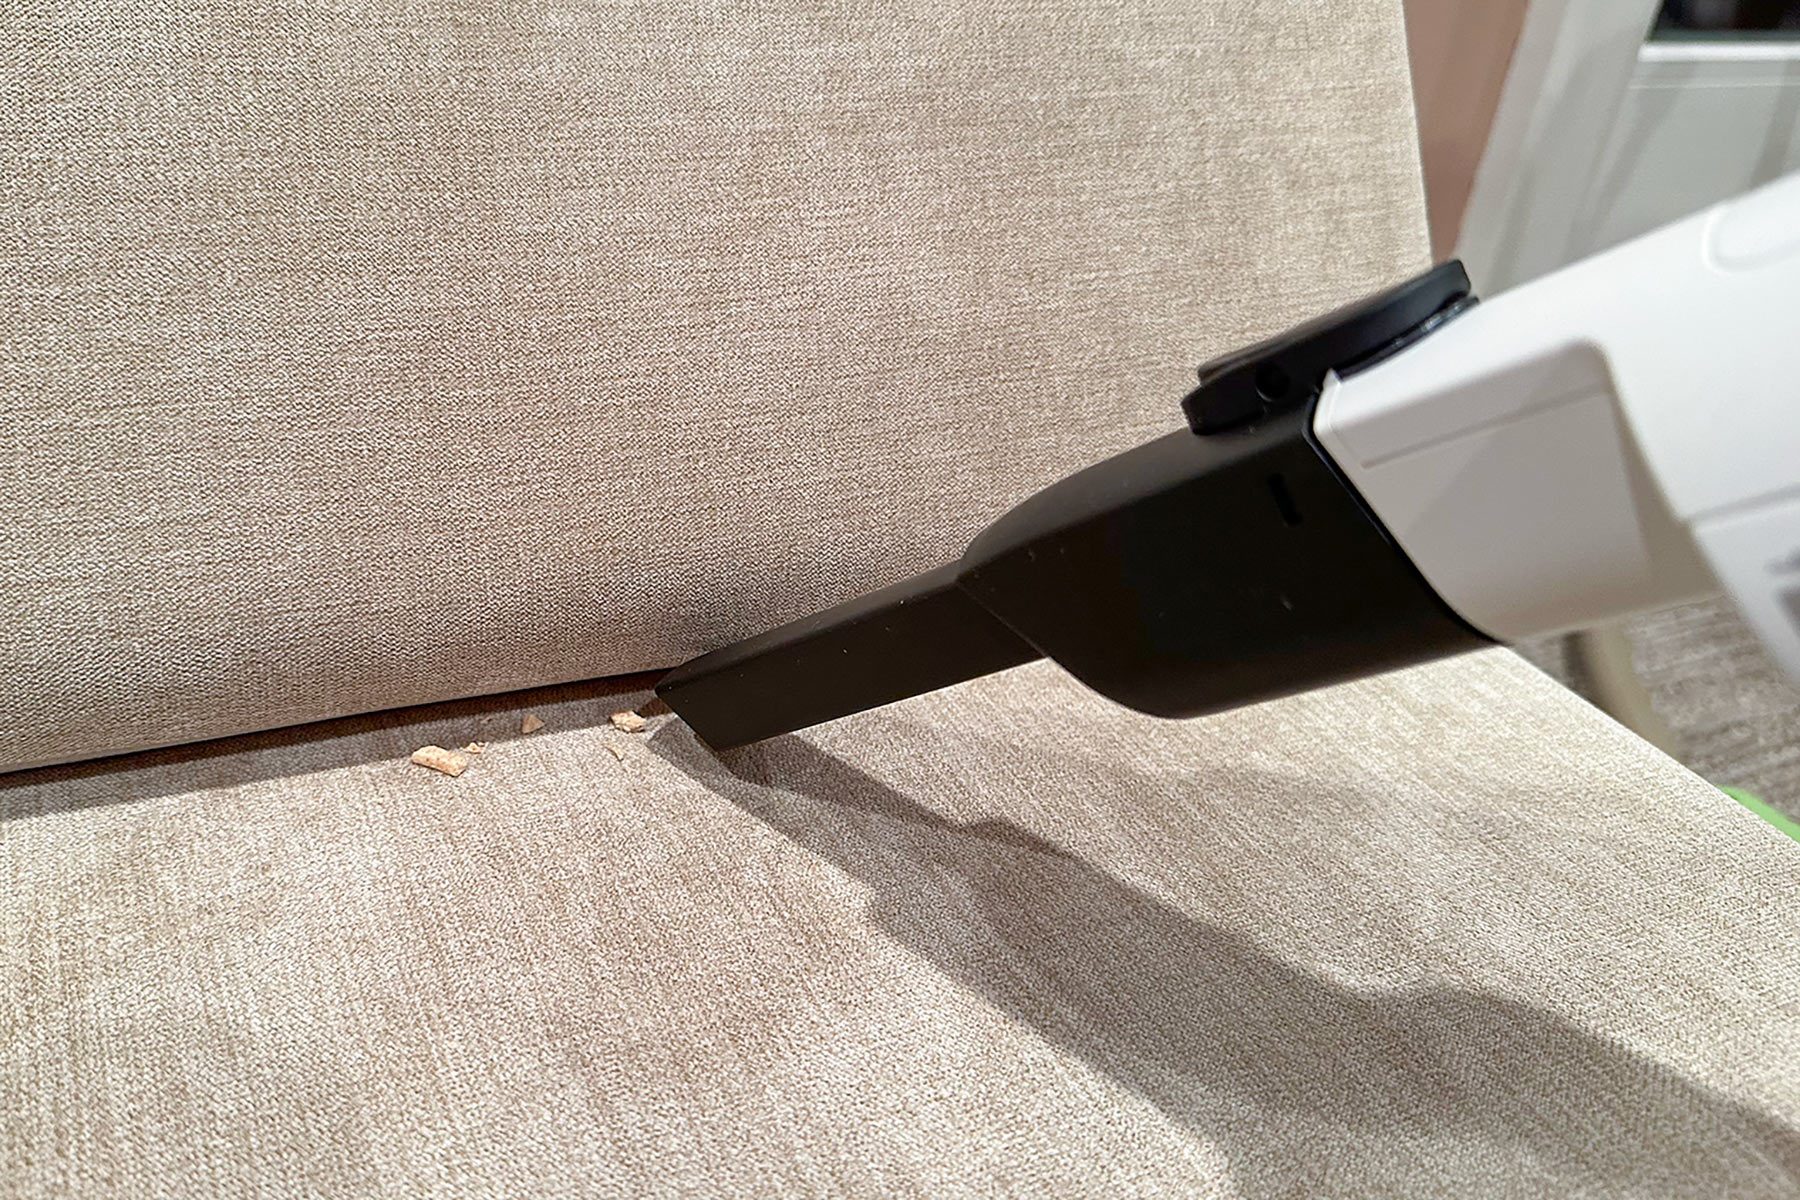  Shark Cordless Pro Vacuum used for cleaning couch